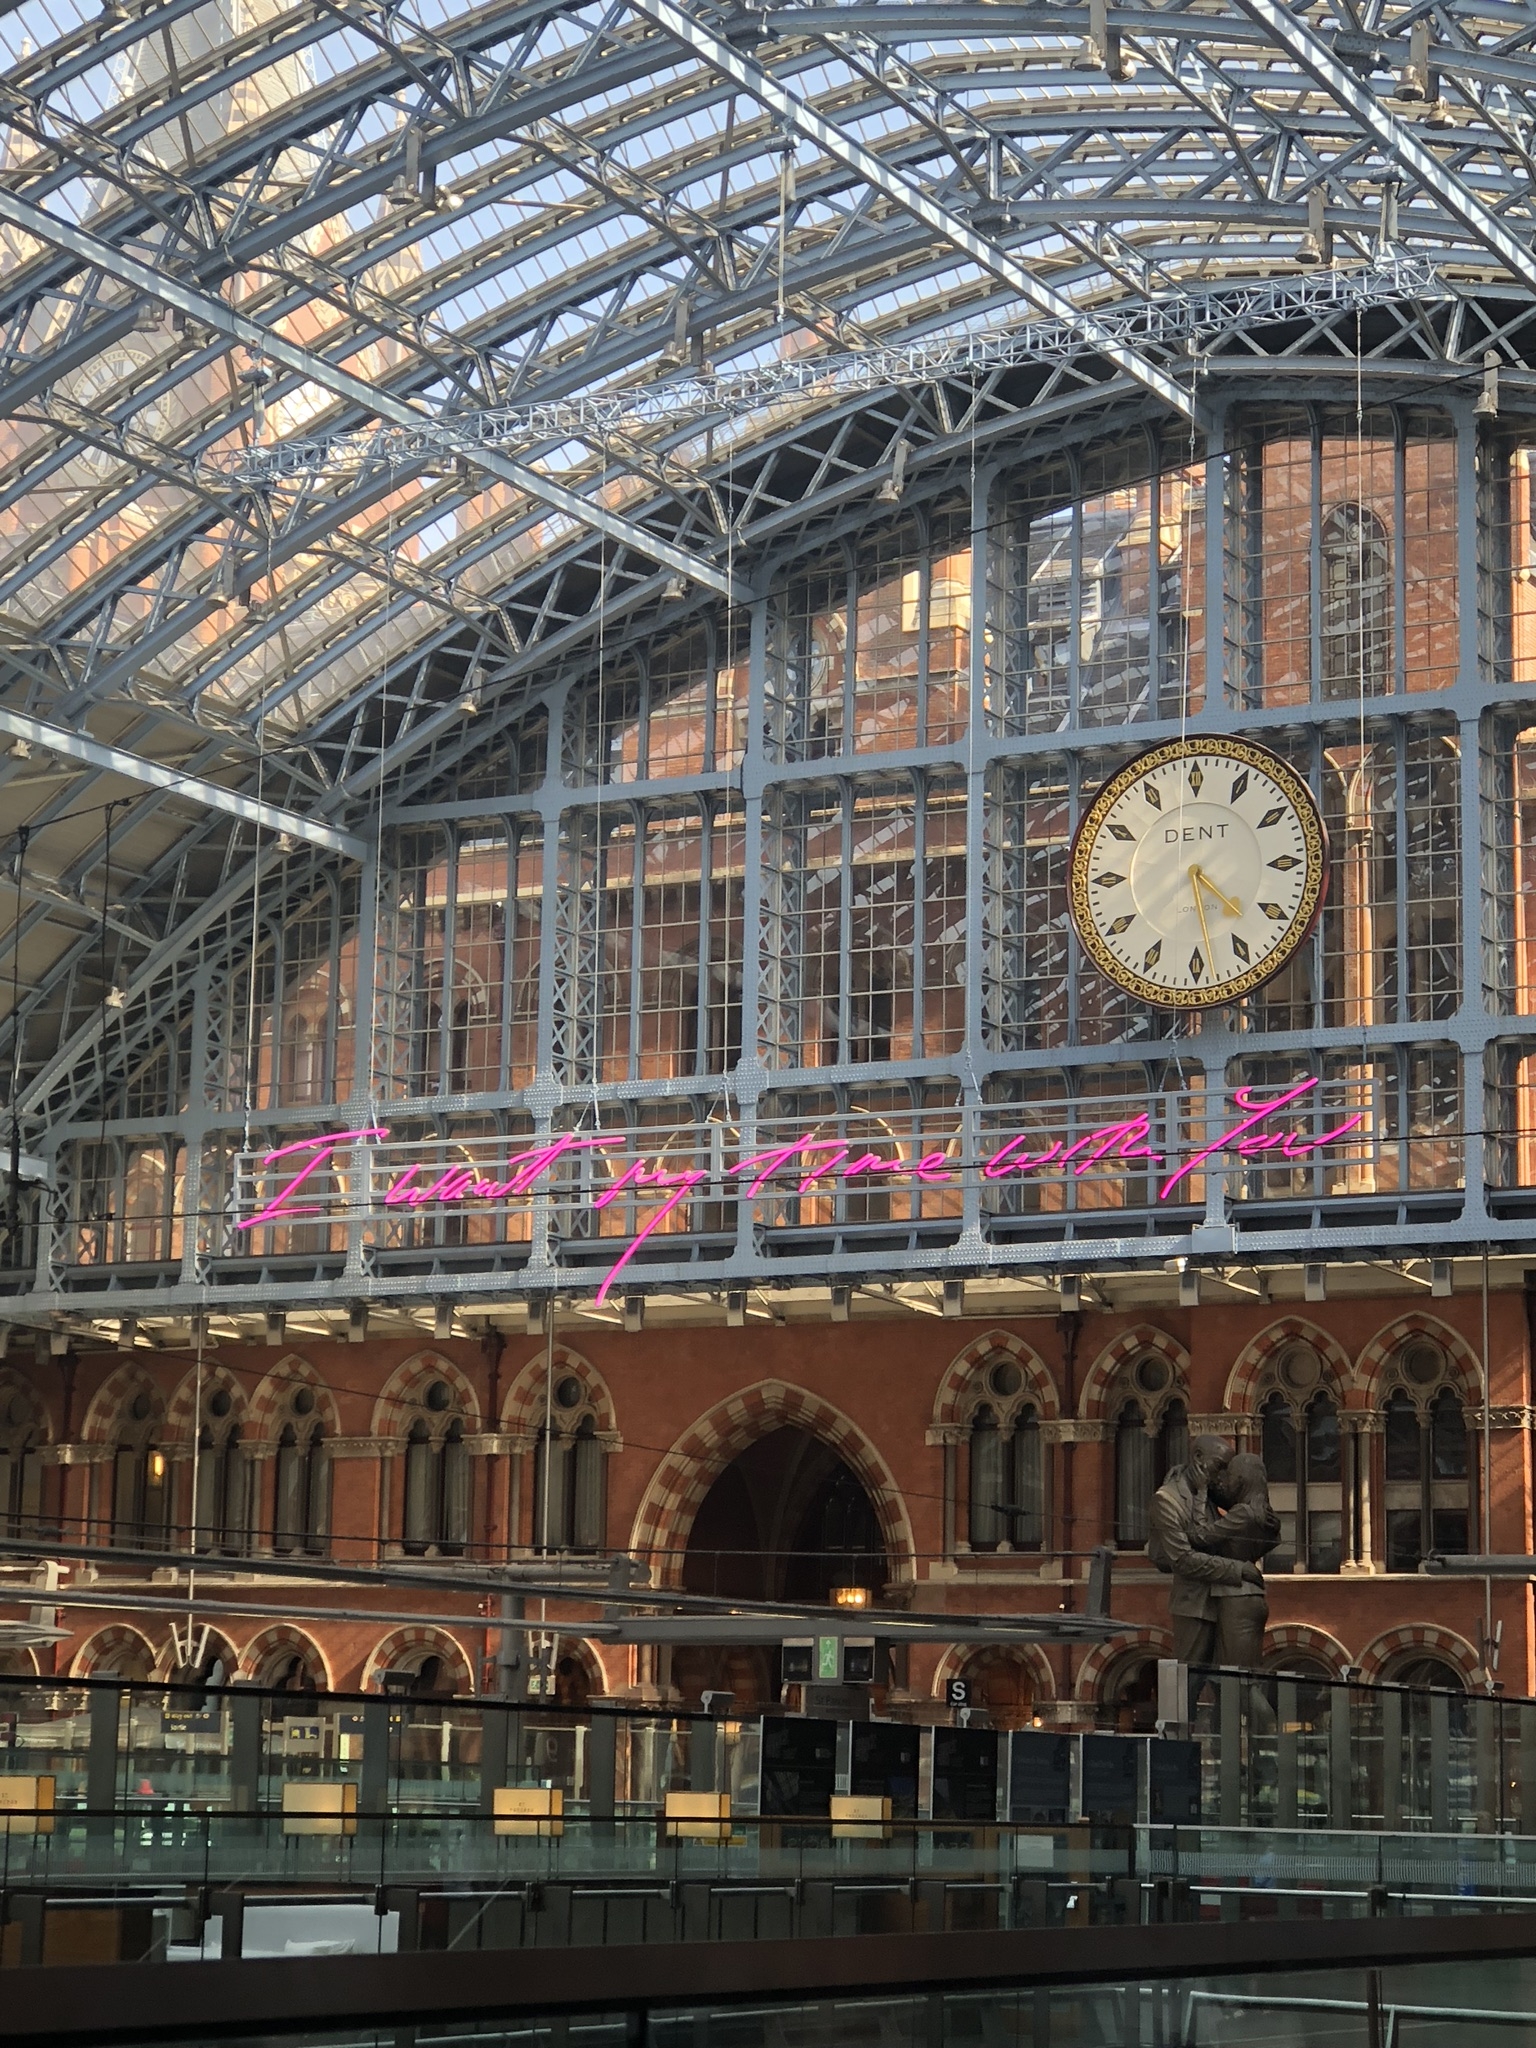  Tracey Emin's artwork for St Pancras station  